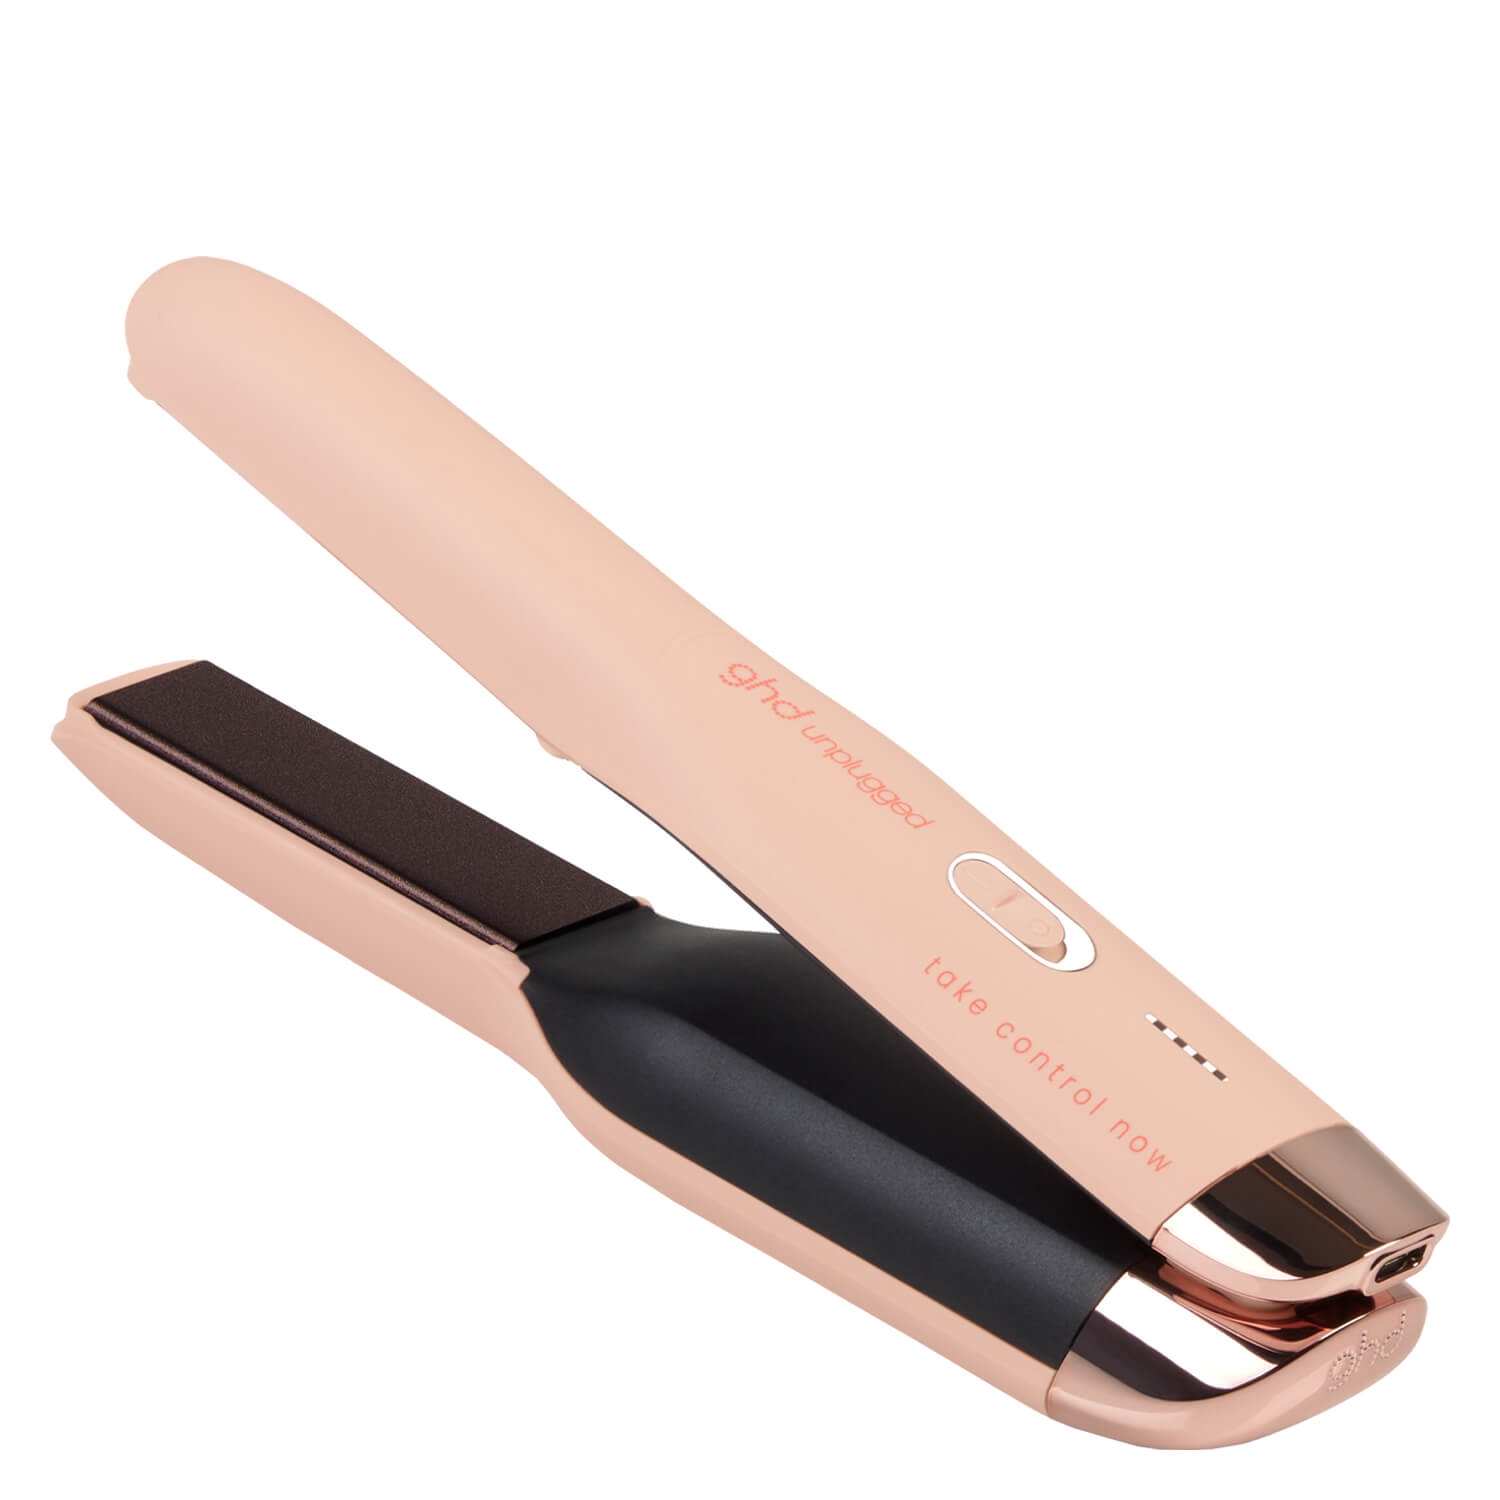 Product image from ghd Tools - Unplugged Cordless Styler Pink Peach Charity Edition